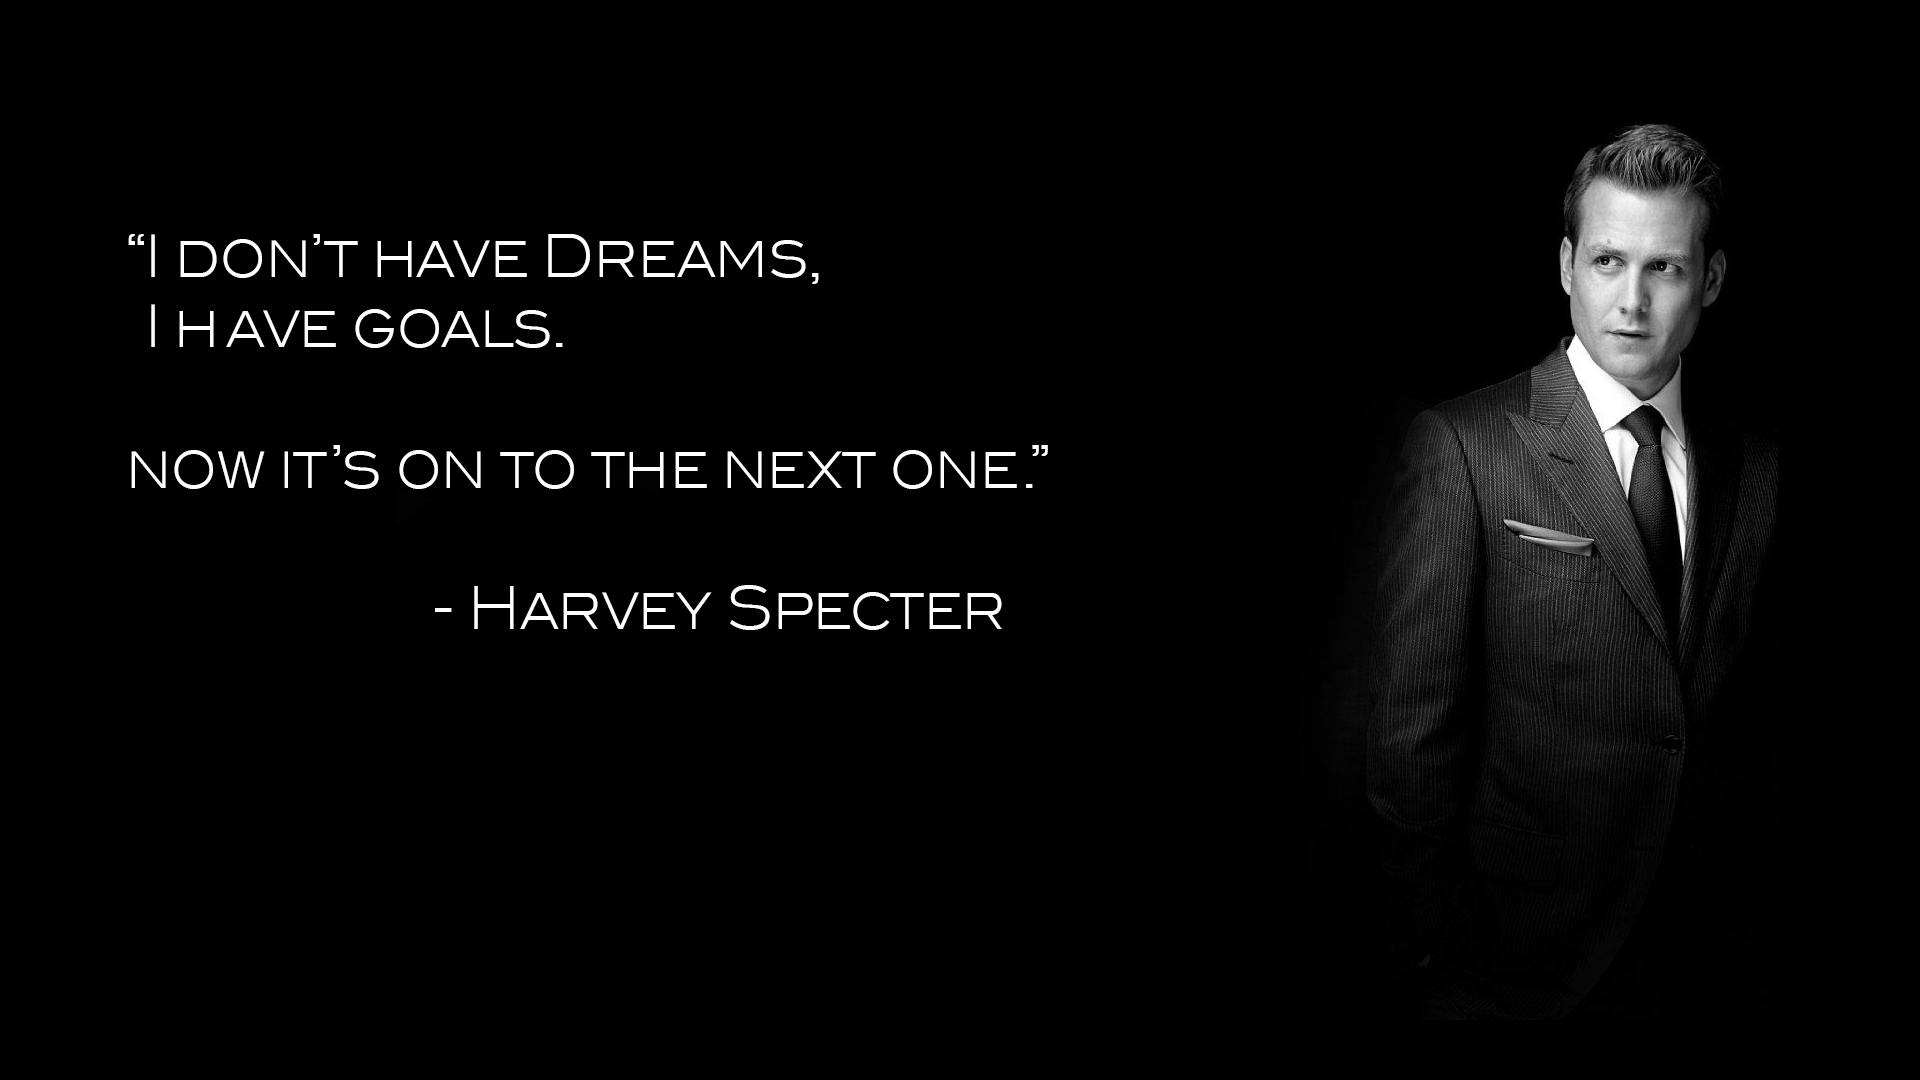 Gallery For gt Harvey Specter Quotes Wallpaper 1920x1080